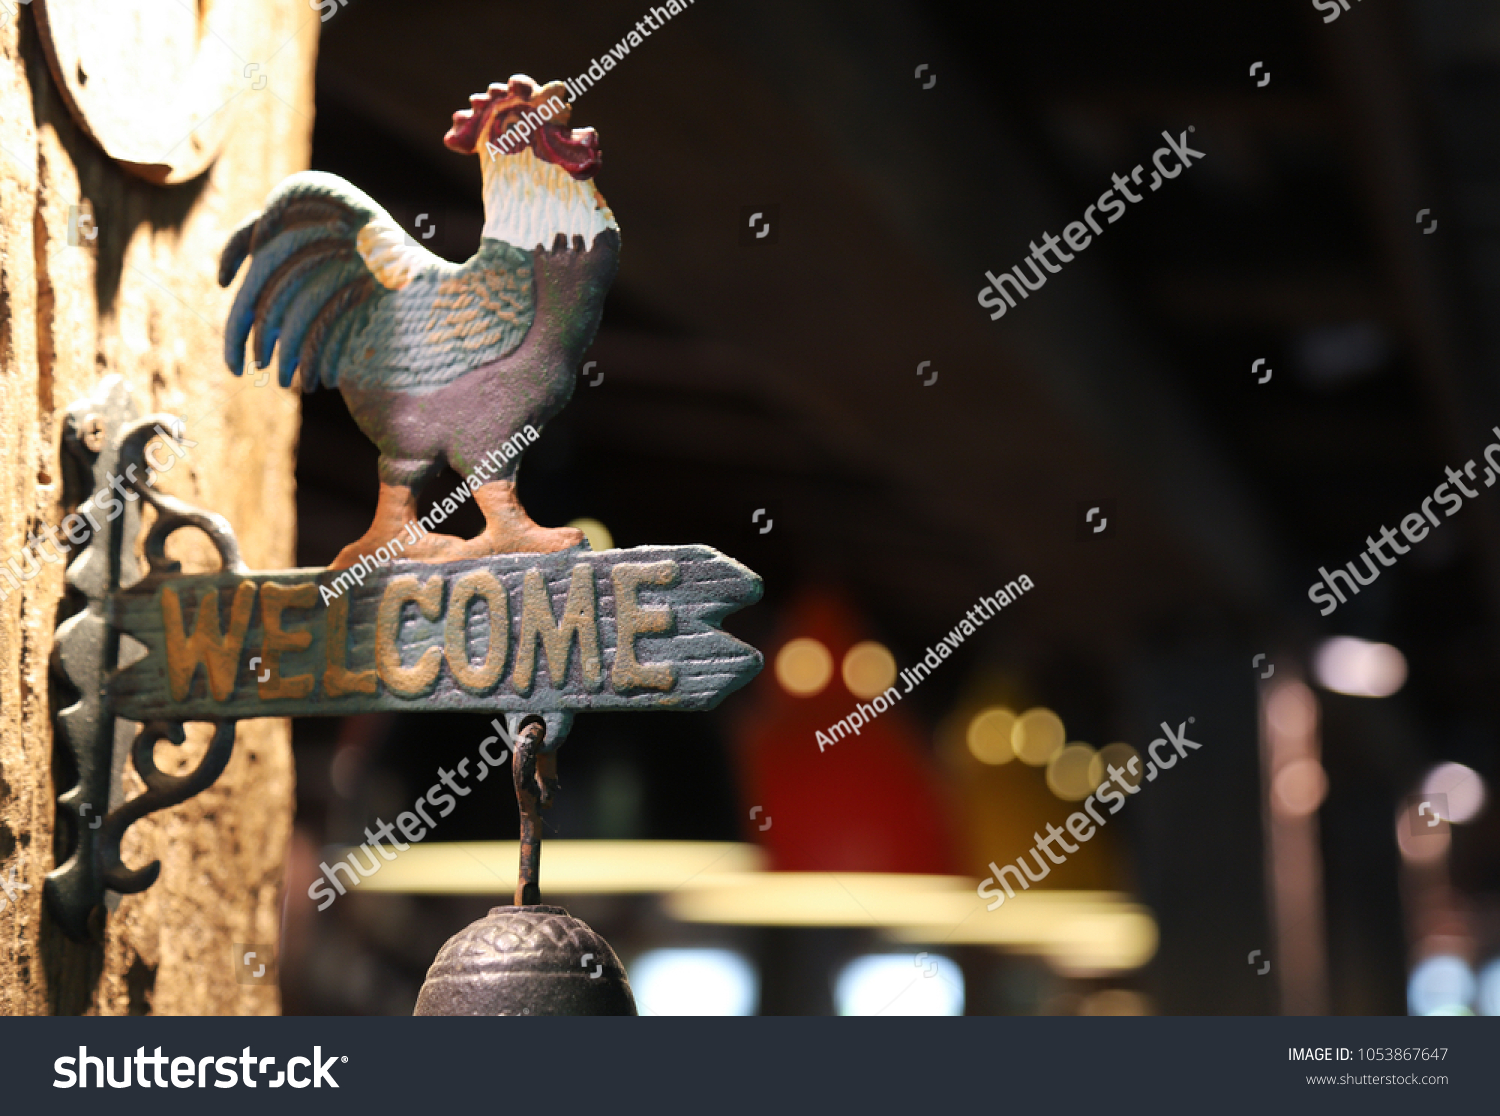 Welcoming new cock to the building